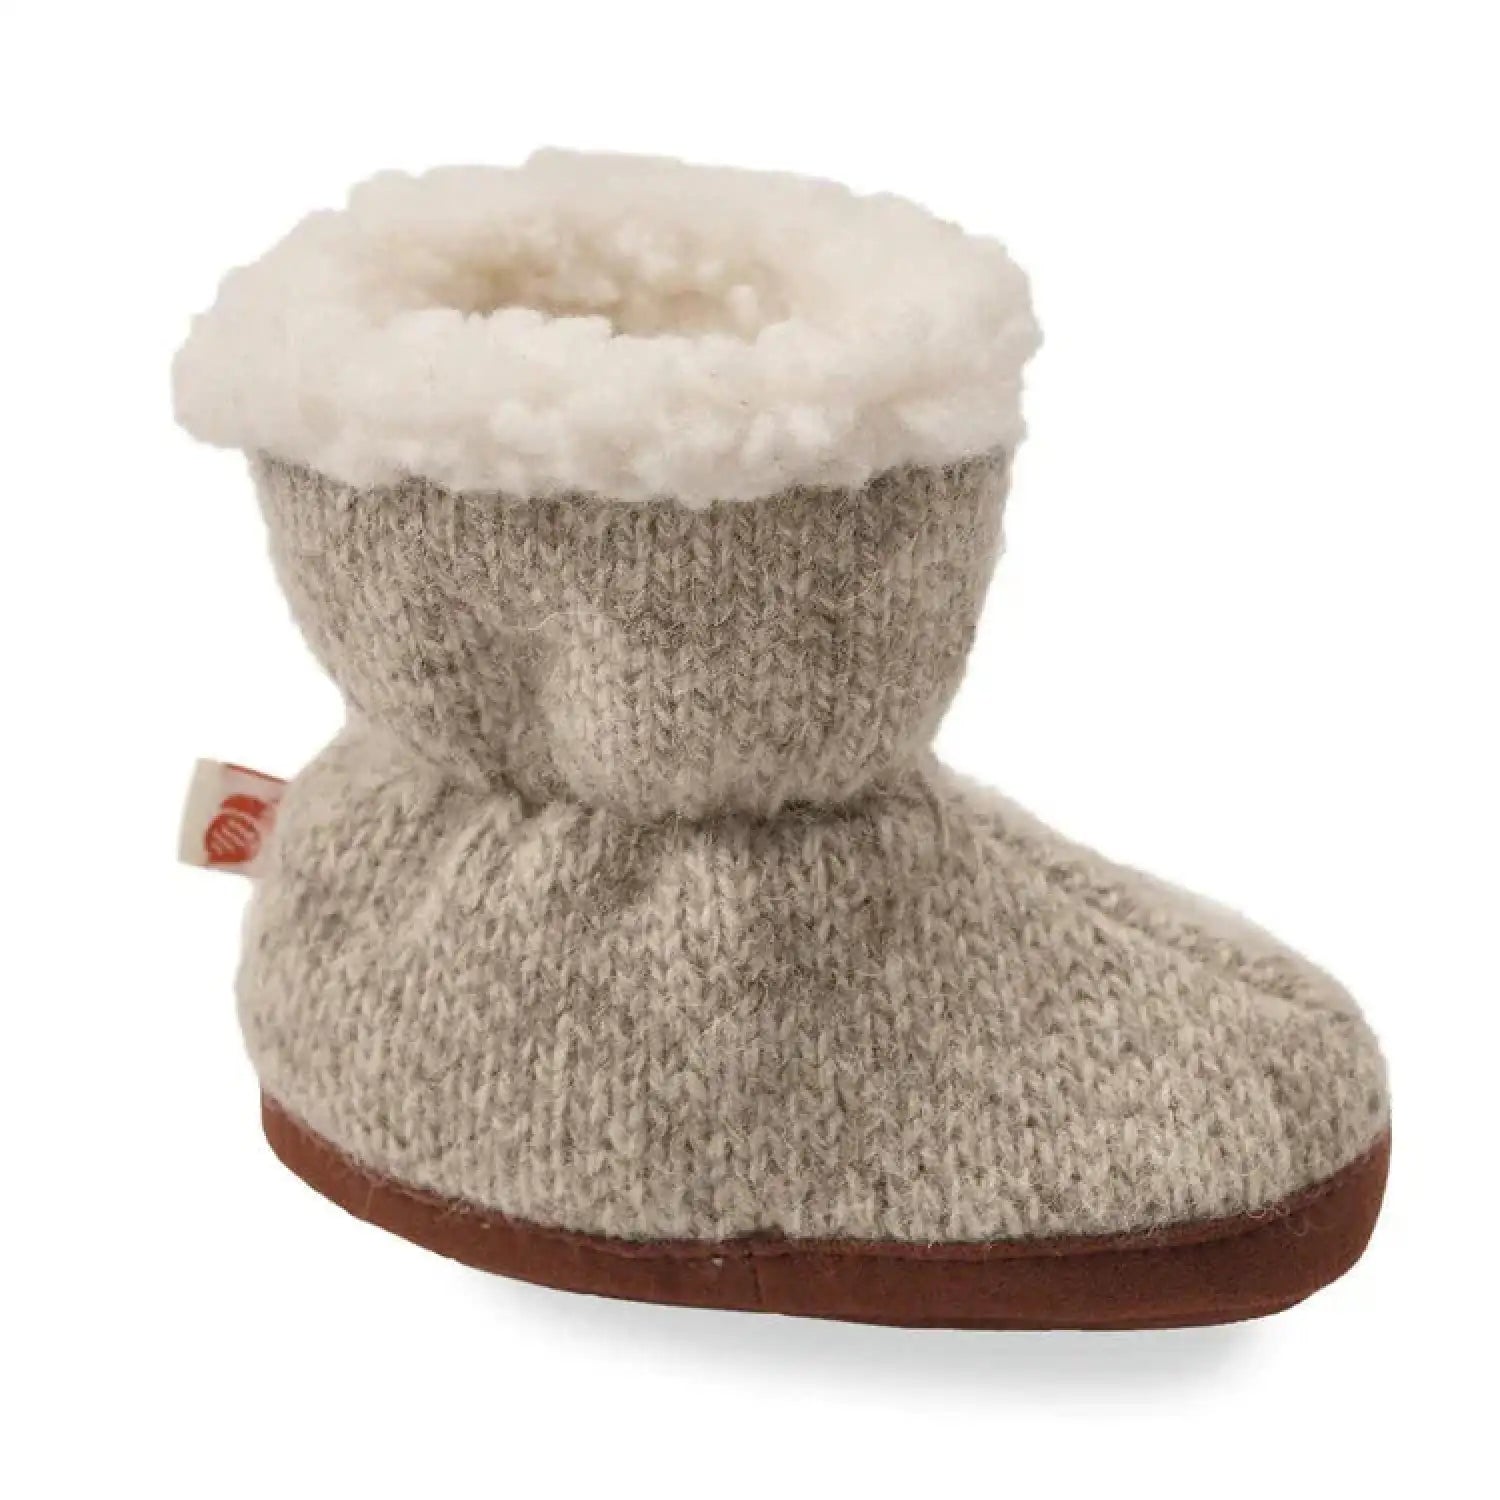 Toddler’s Ragg Wool Booties in grey side view